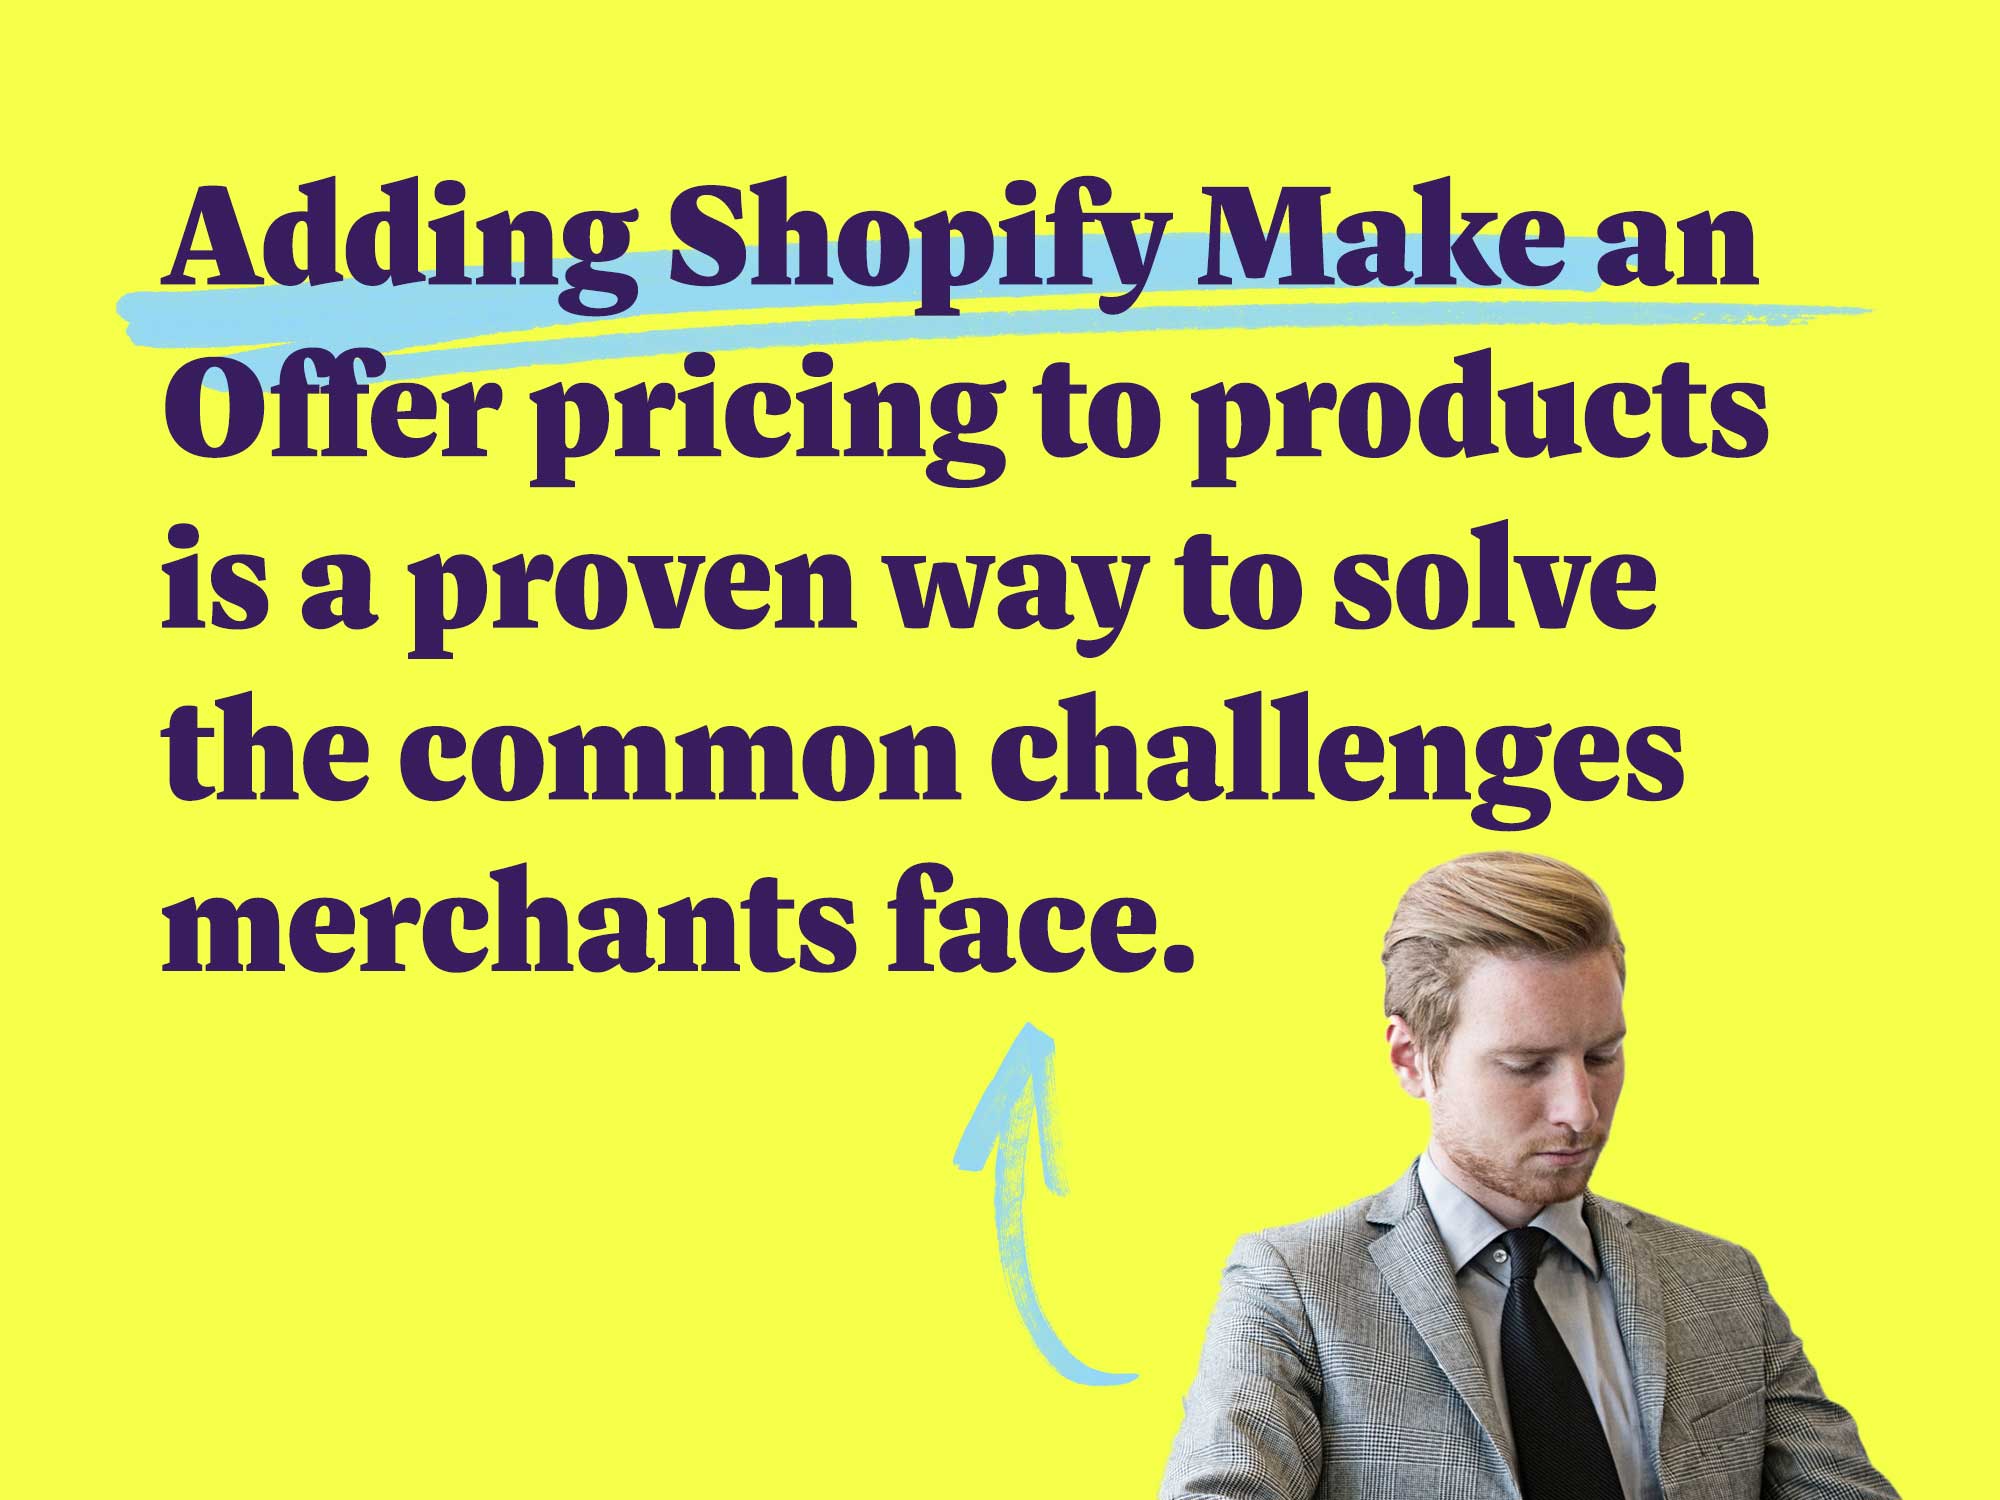 Adding Shopify Make an Offer pricing to products is a proven way to solve the common challenges merchants face.